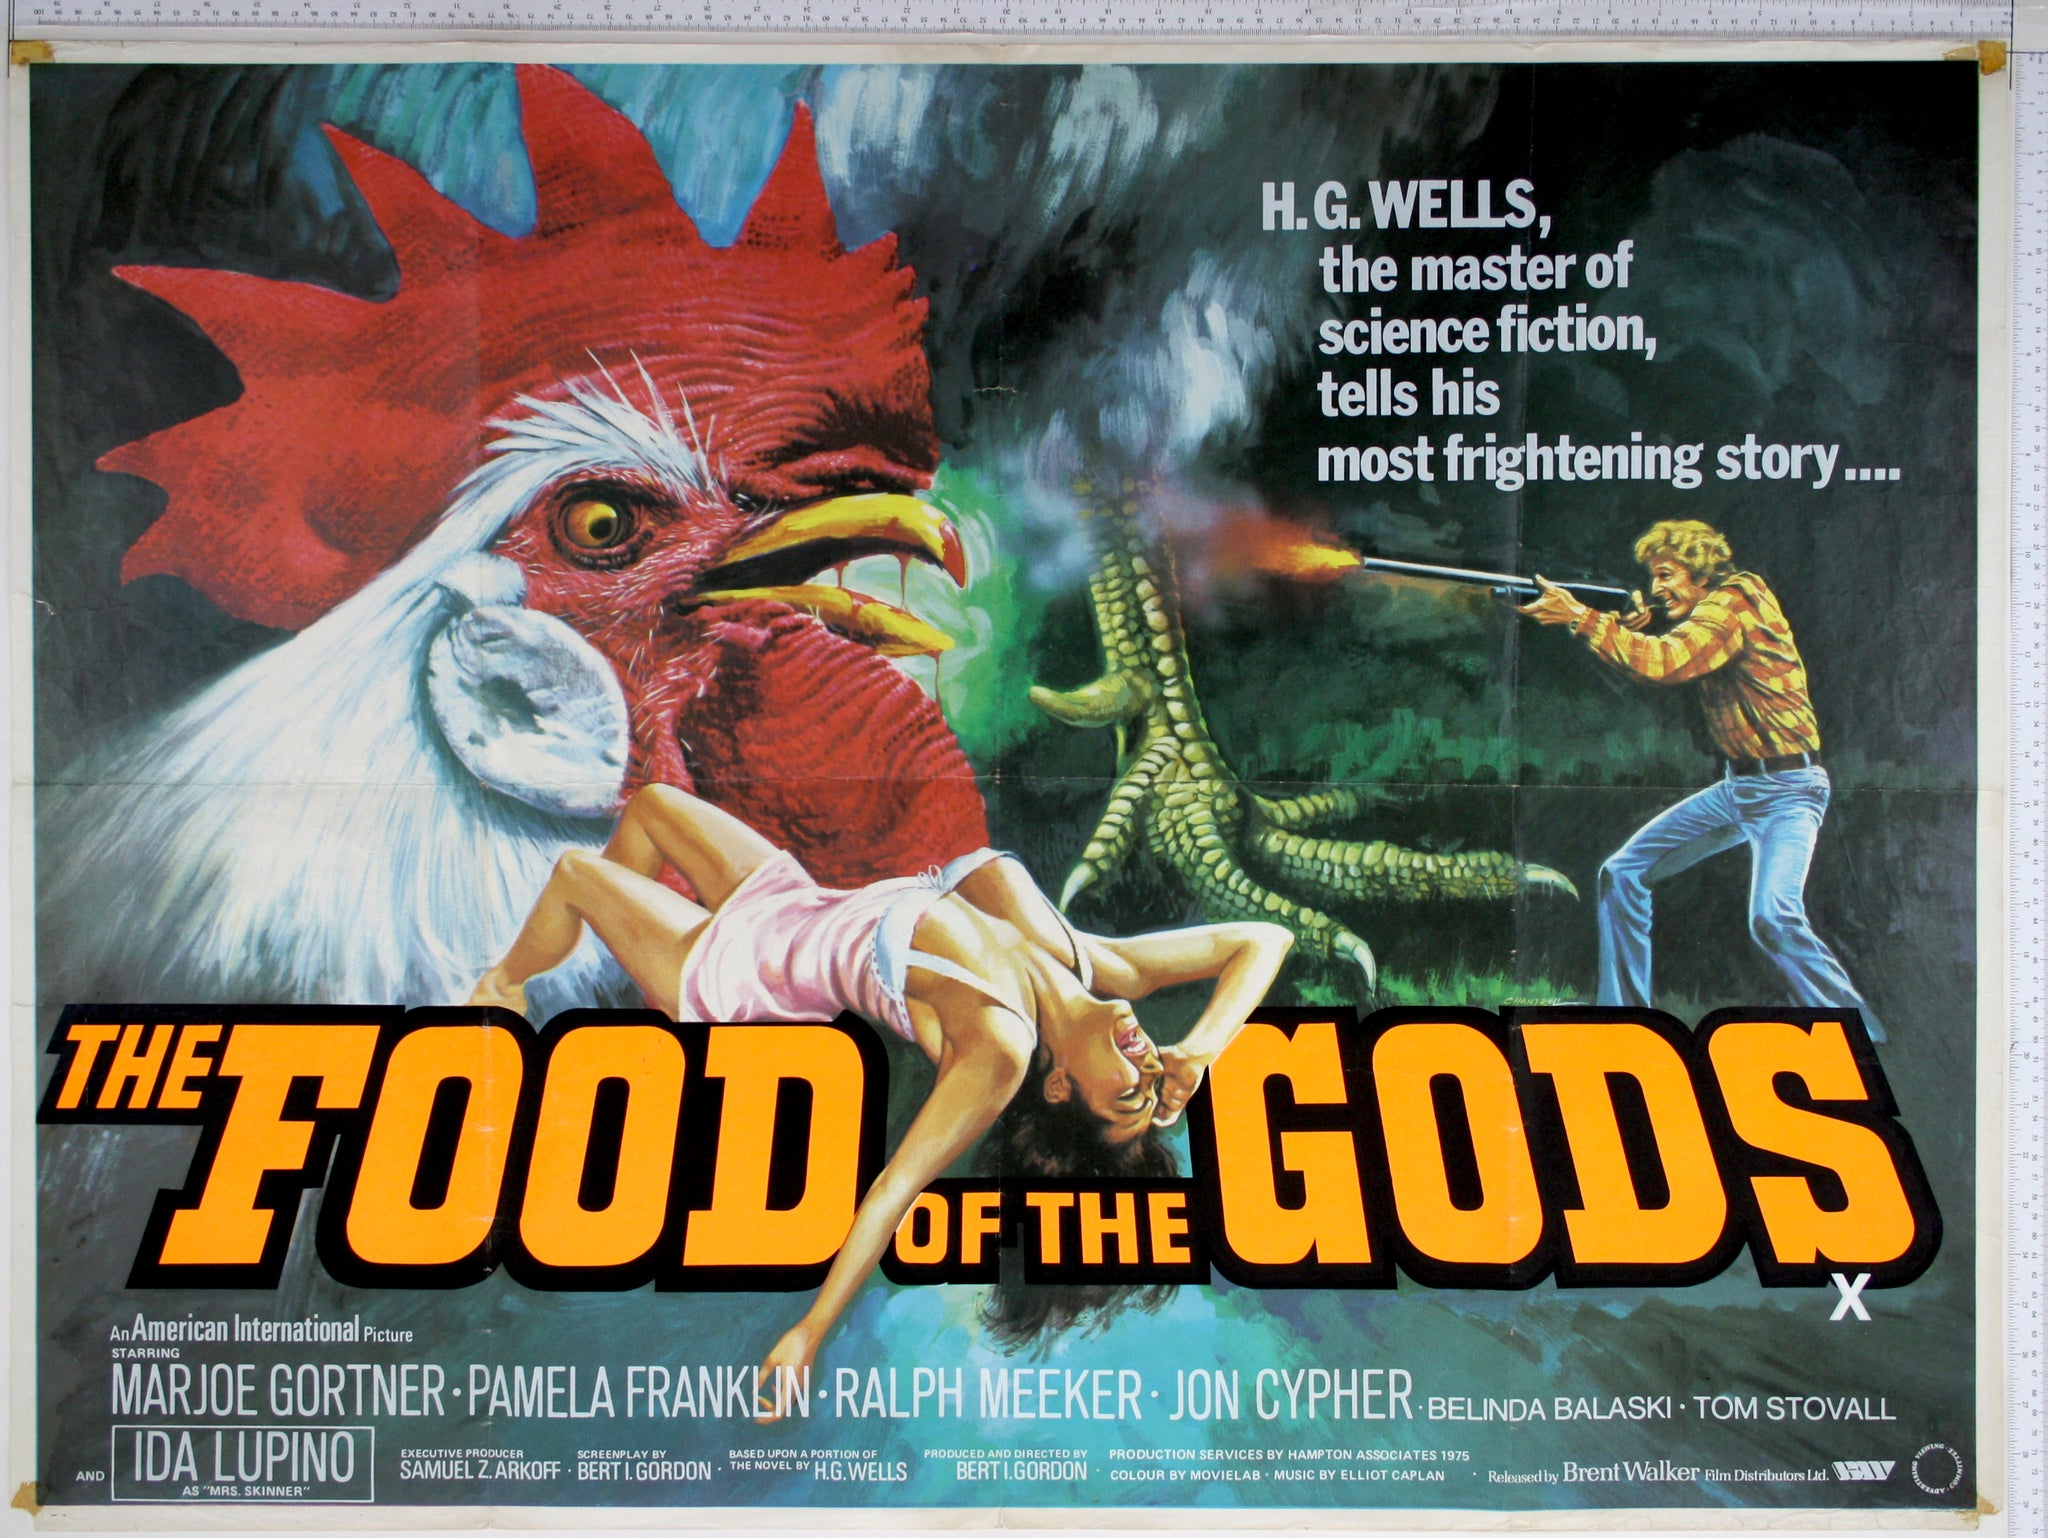 Artwork of a Giant rooster's head, blood on its beak, and in the background, its giant claw. At right a man shoots a shotgun at the monsters, while underneath, lying along the top of the title, is a screaming woman on her back.